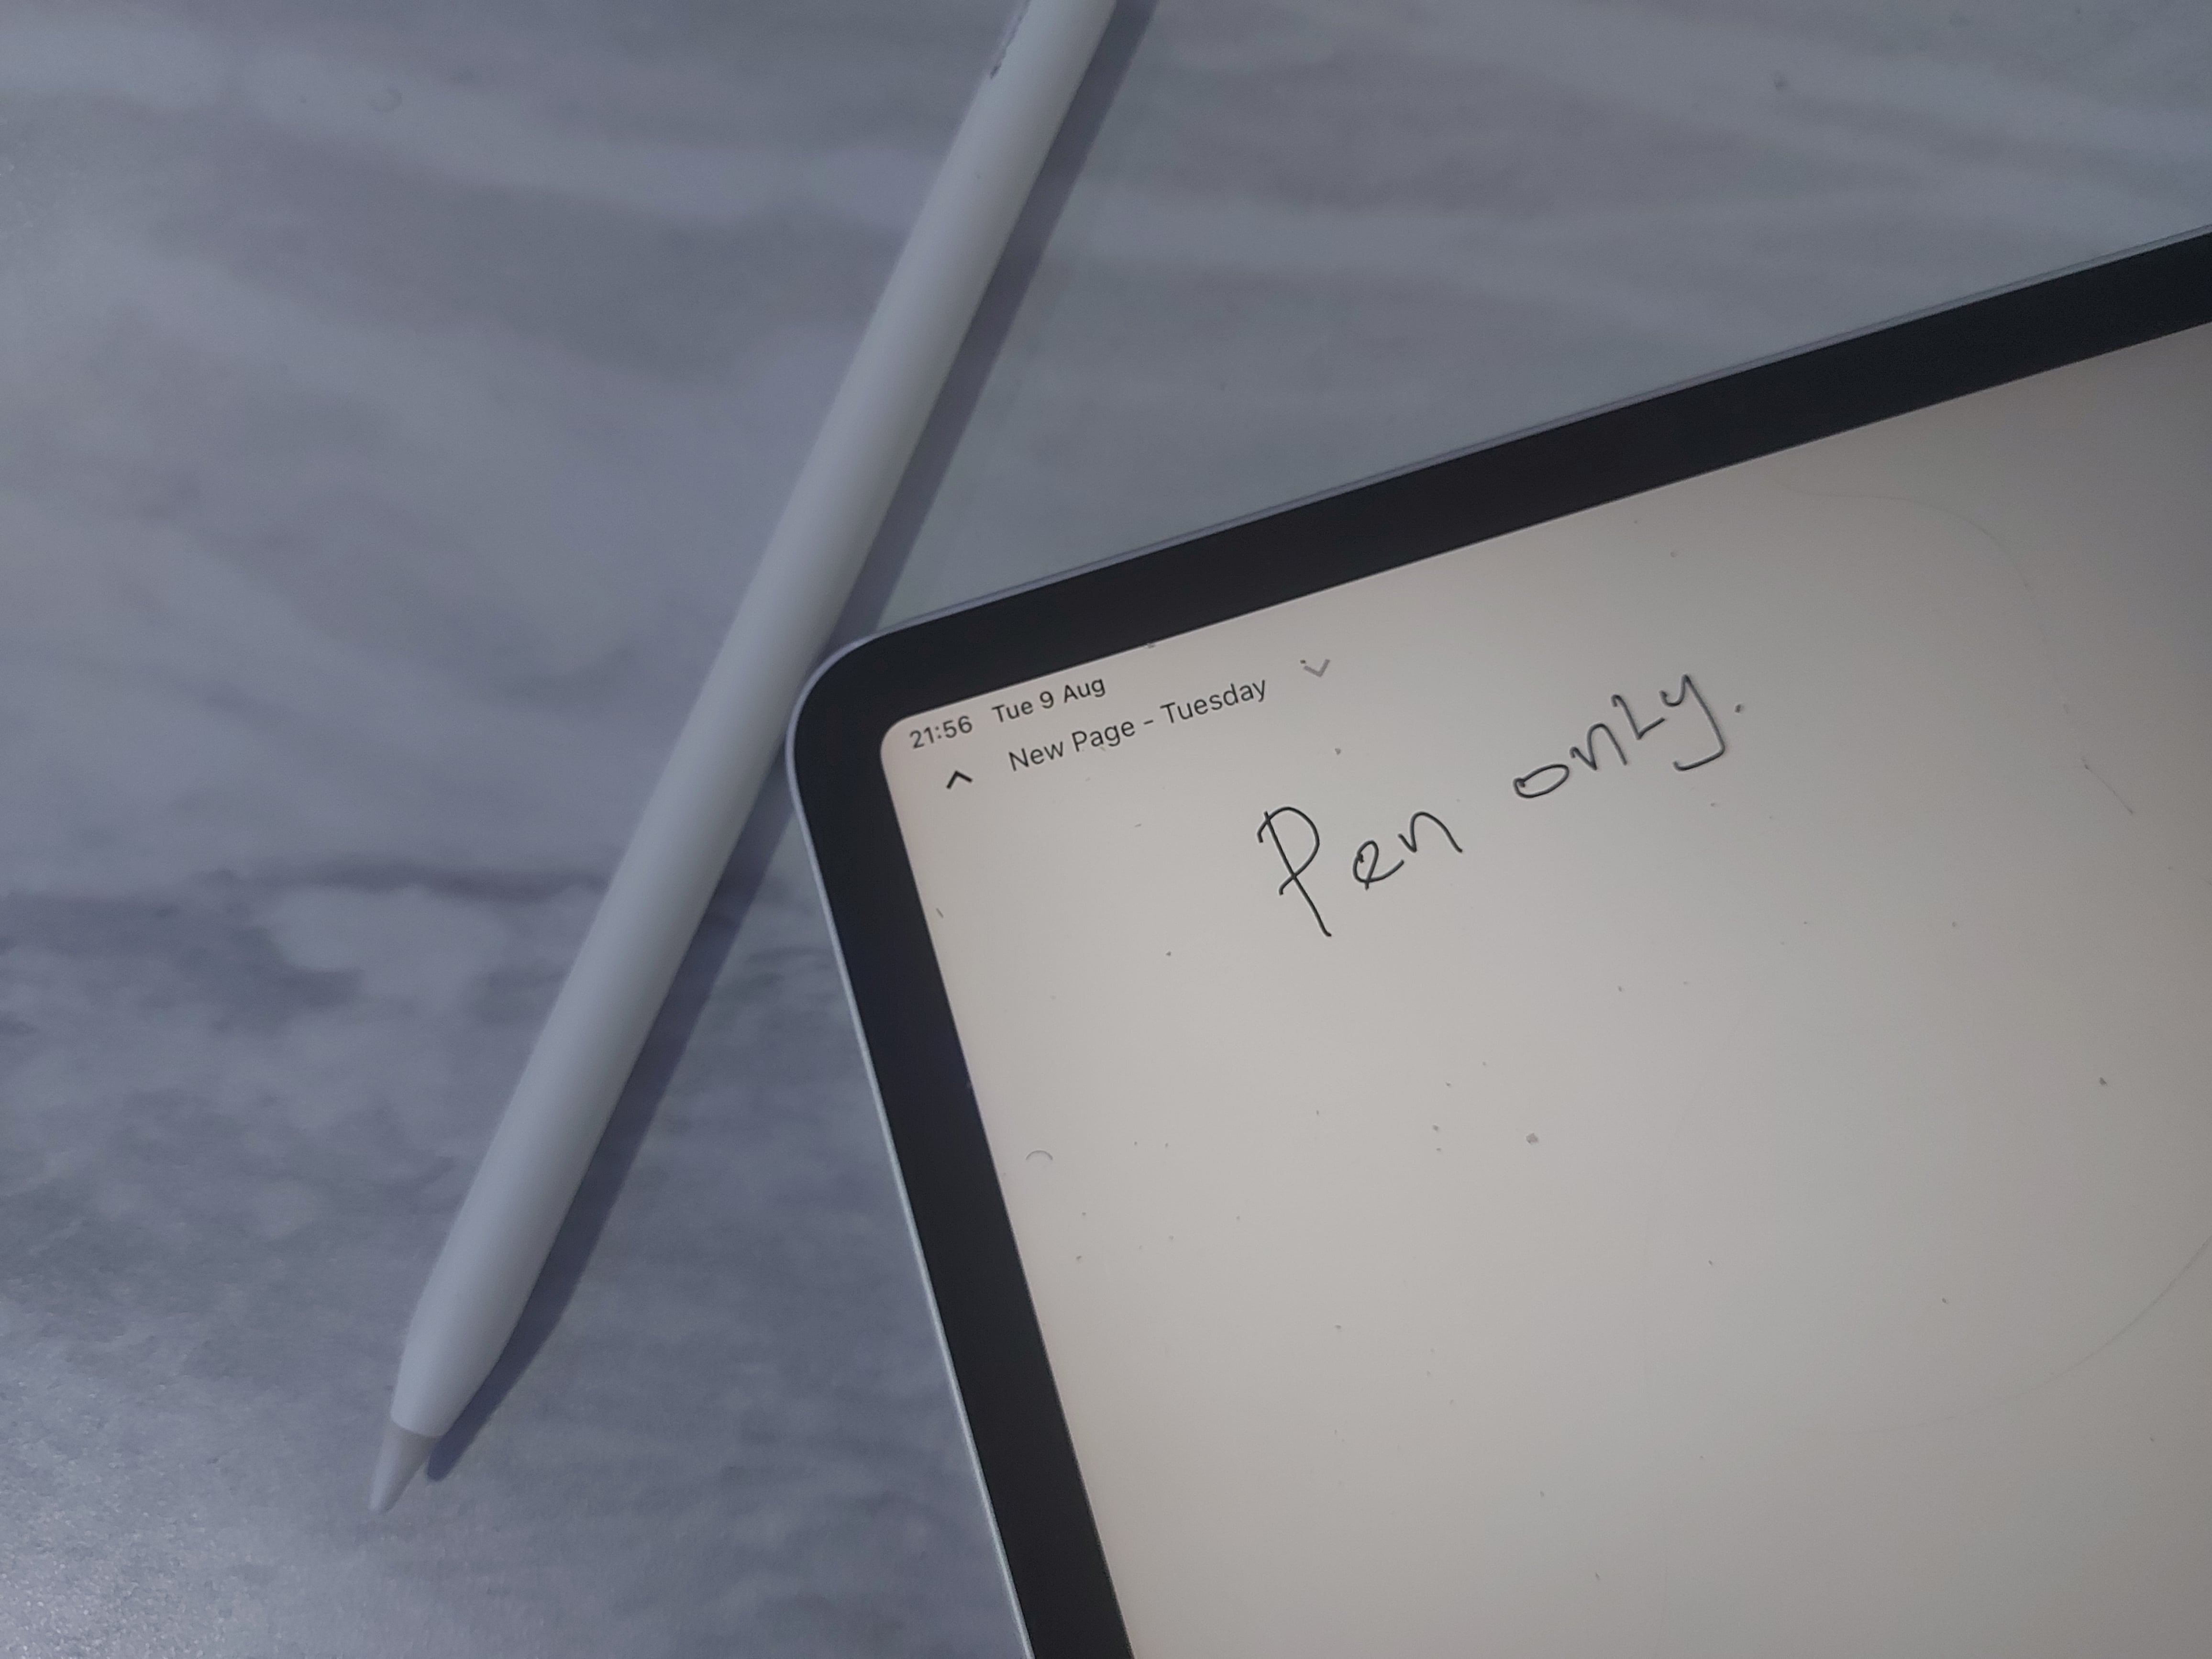 Shop UMass Apple Pencil: Take Notes in Class with Ease